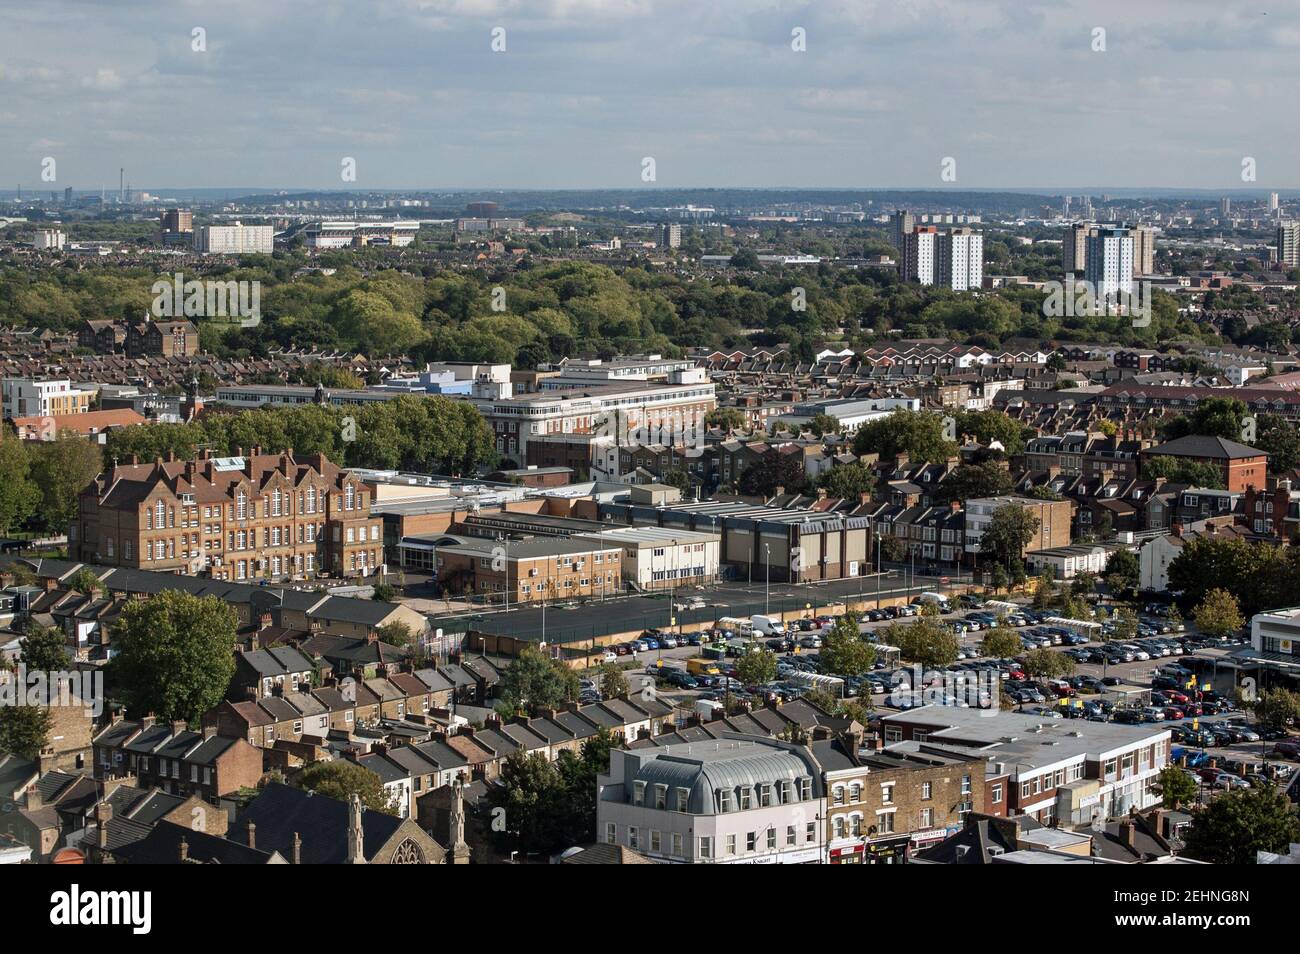 View from a tall building looking south across Stratford in the London Borough of Newham with the University of East London campus in the middle. Stock Photo